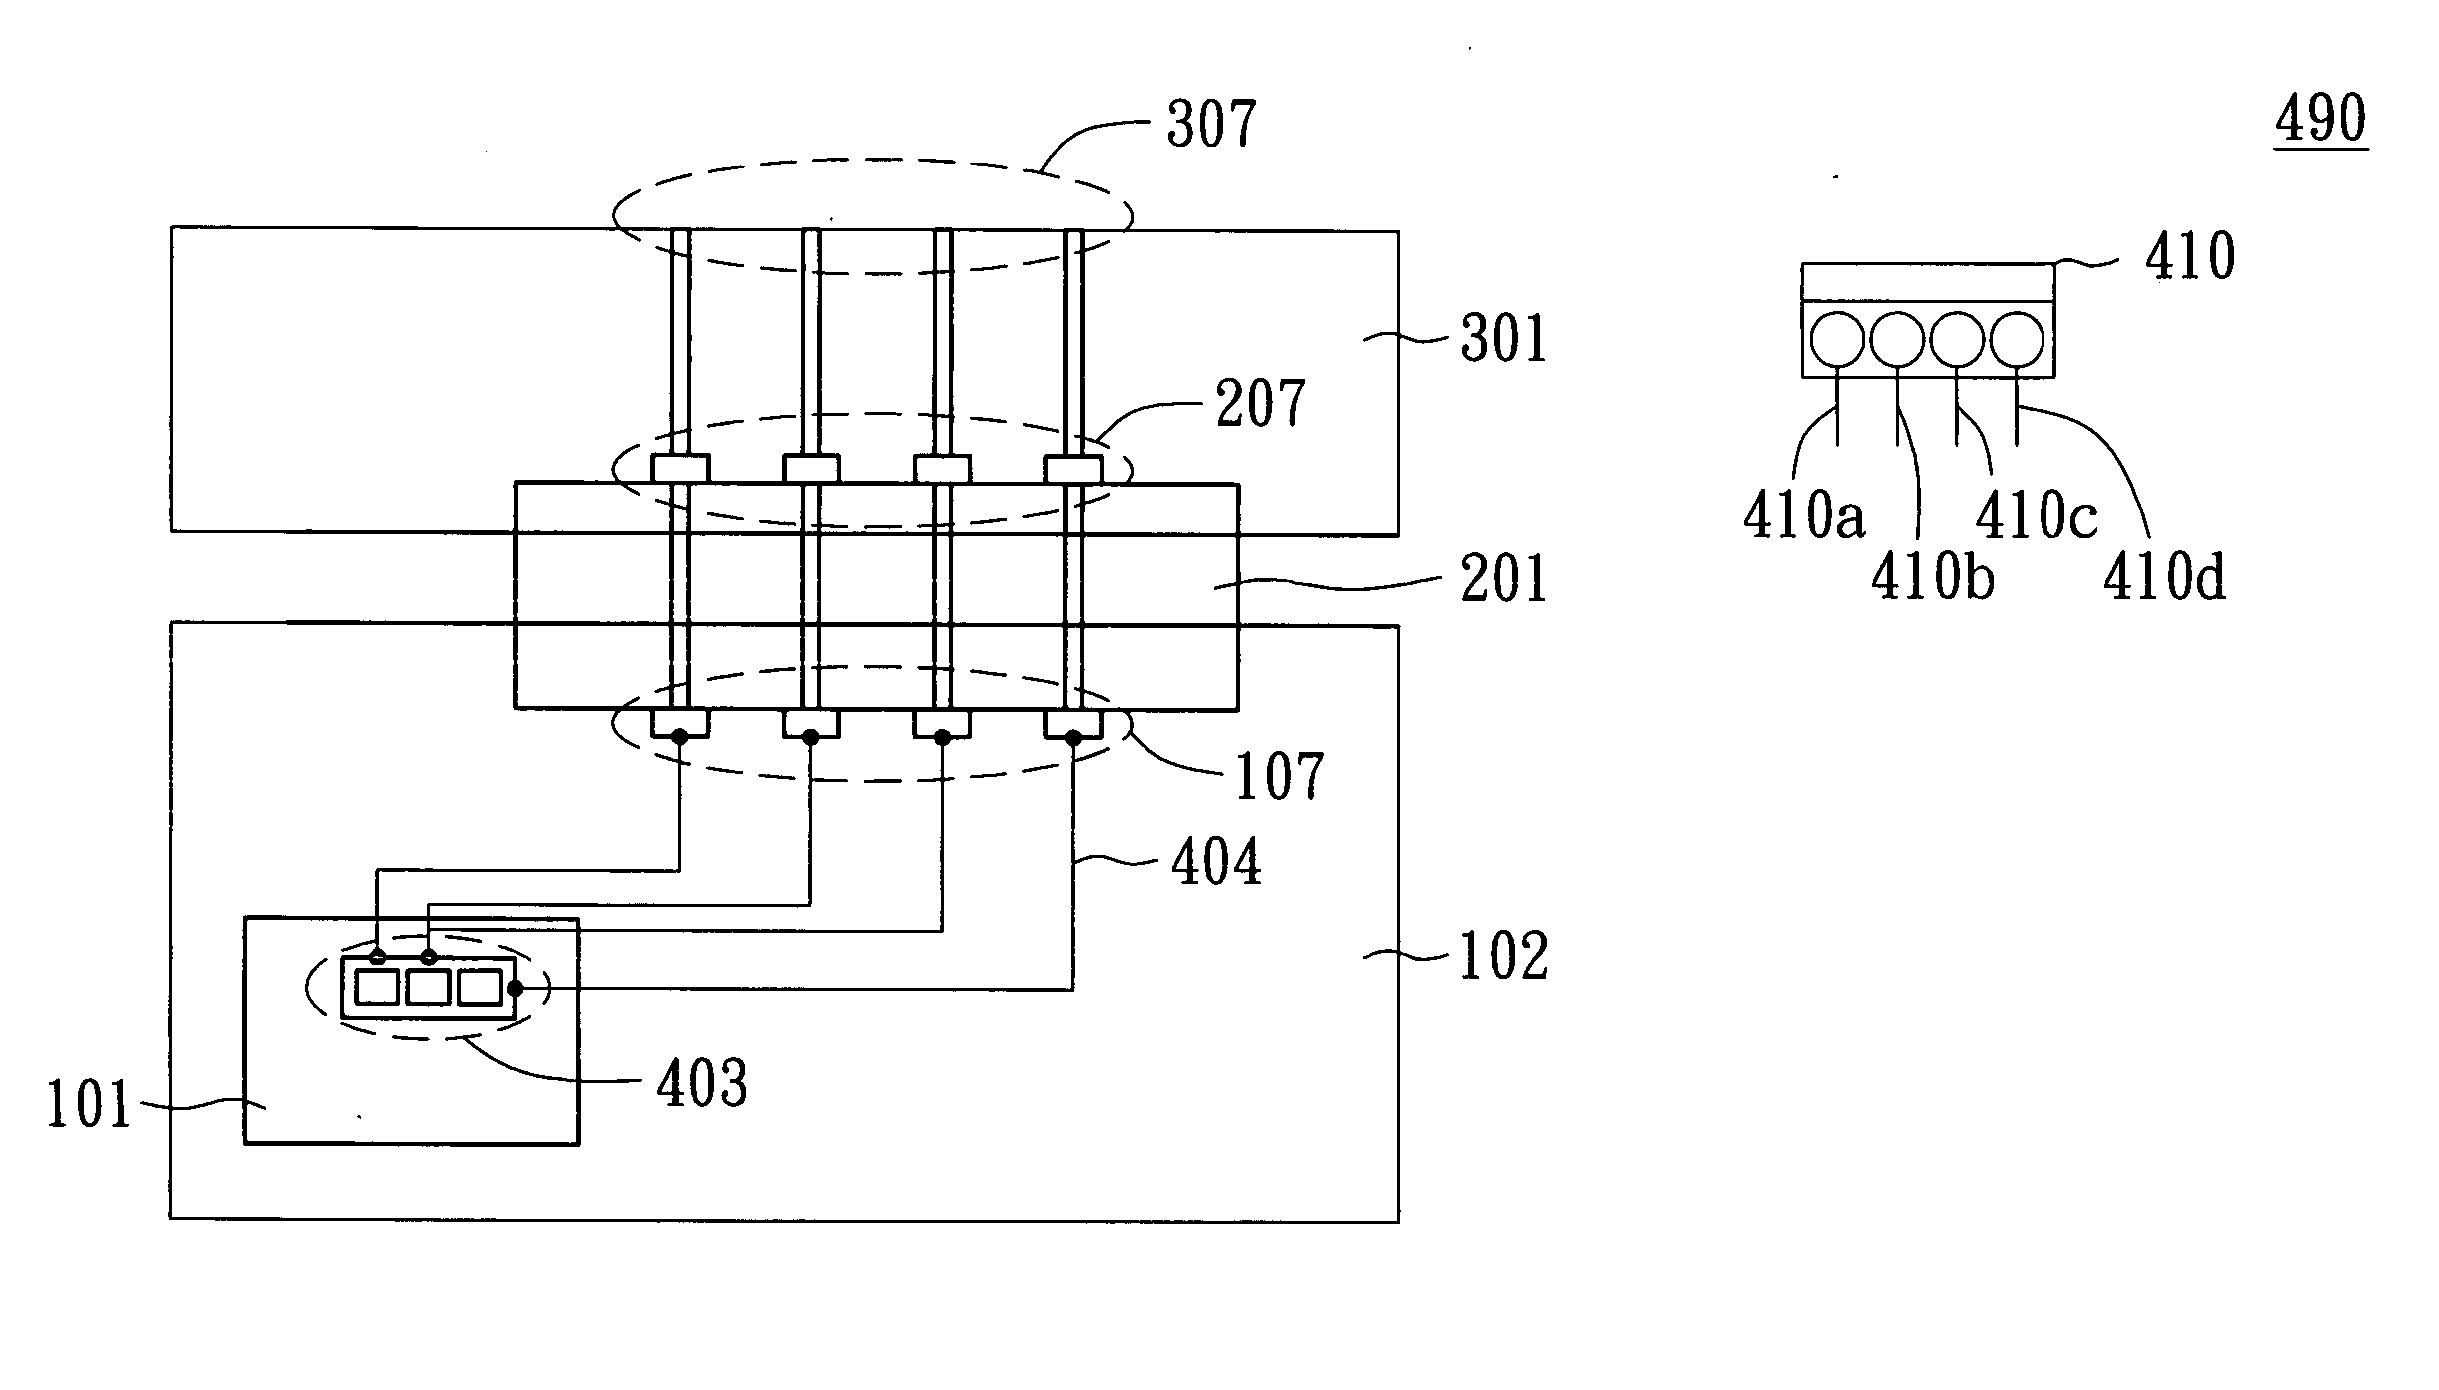 Bonding configuration structure for facilitating electrical testing in a bonding process and a testing method using the same